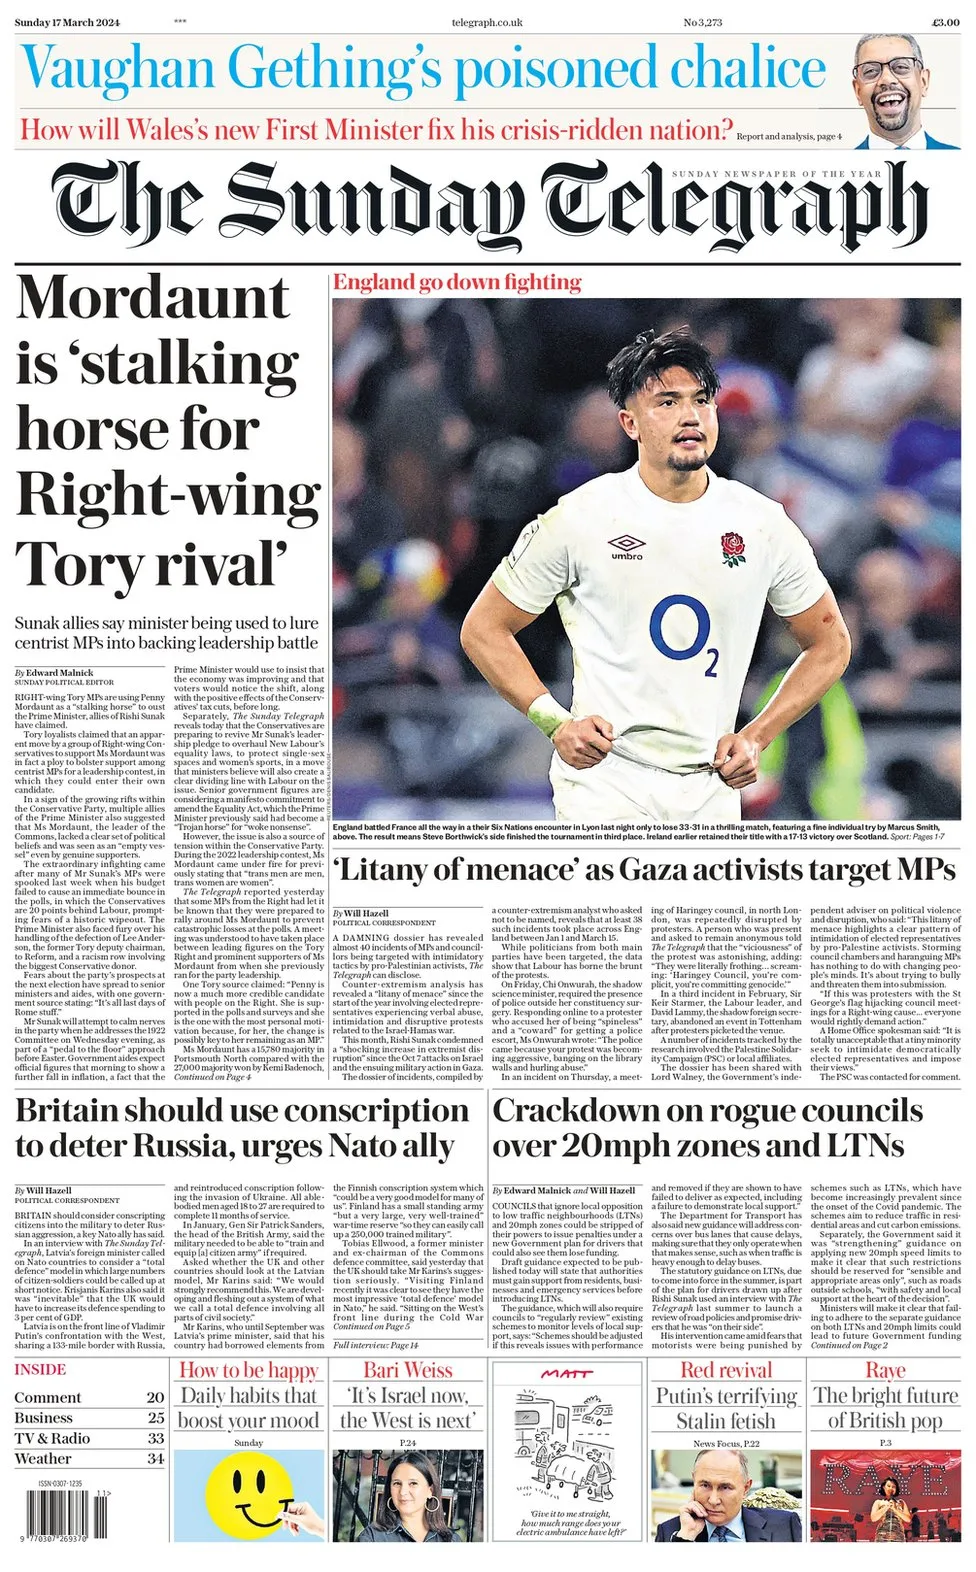 The Sunday Telegraph - Mordaunt is ‘stalking horse for right-wing Tory rival’